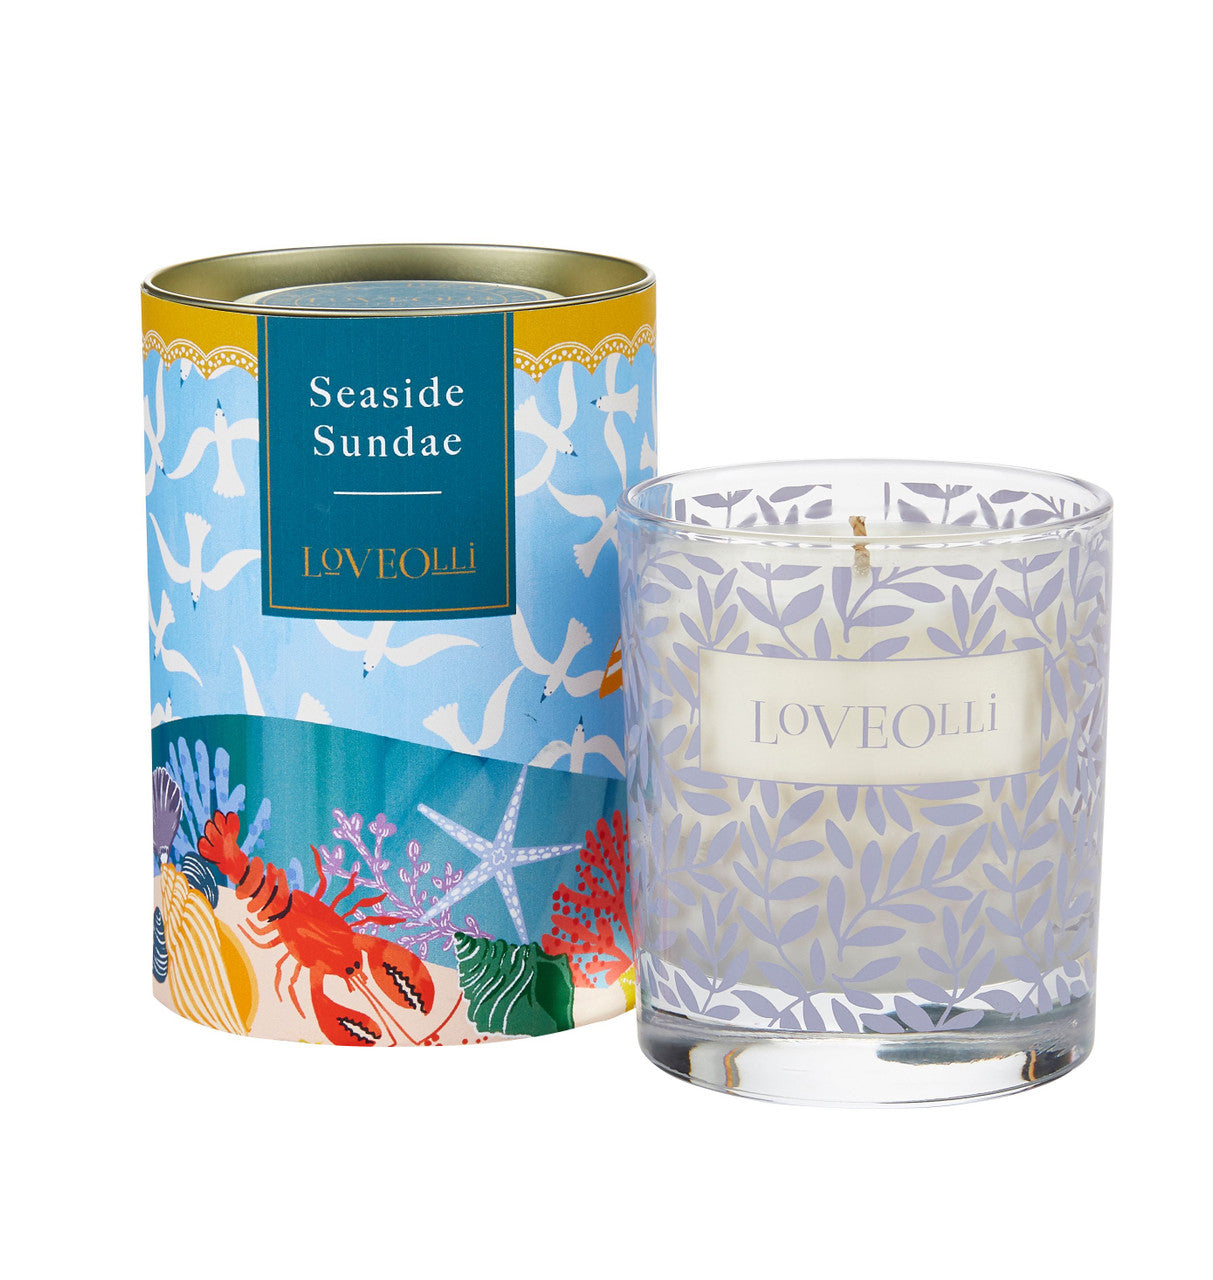 Love Olli Seaside Sundae scented candle in glass. Hand poured in the UK.